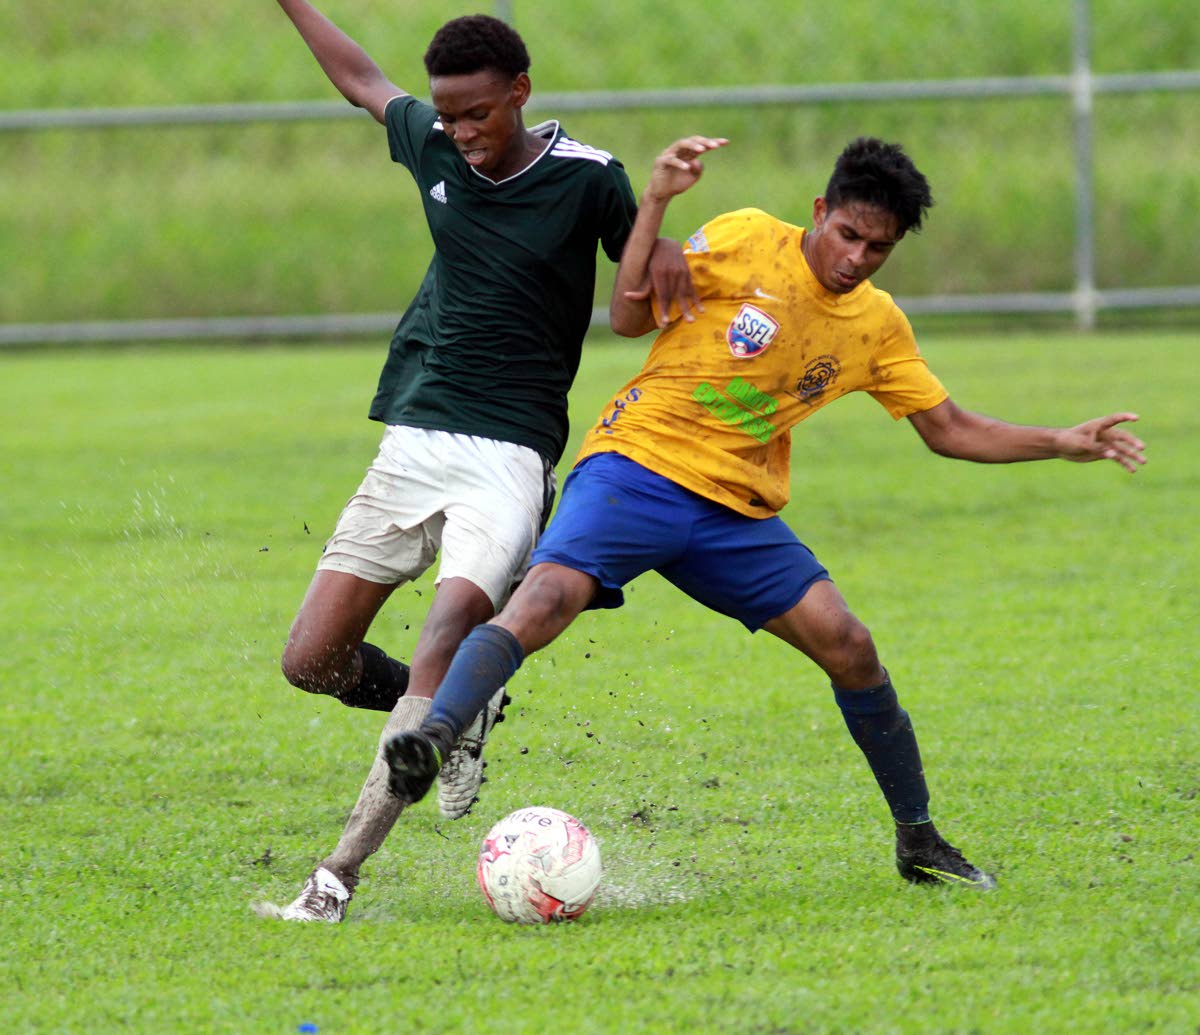 A Shiva Boys’ player battles with his opponent from Rio Claro West during a SSFL South Zone Under-20 match on Friday at the Manny Ramjohn Stadium Training Ground, Marabella.